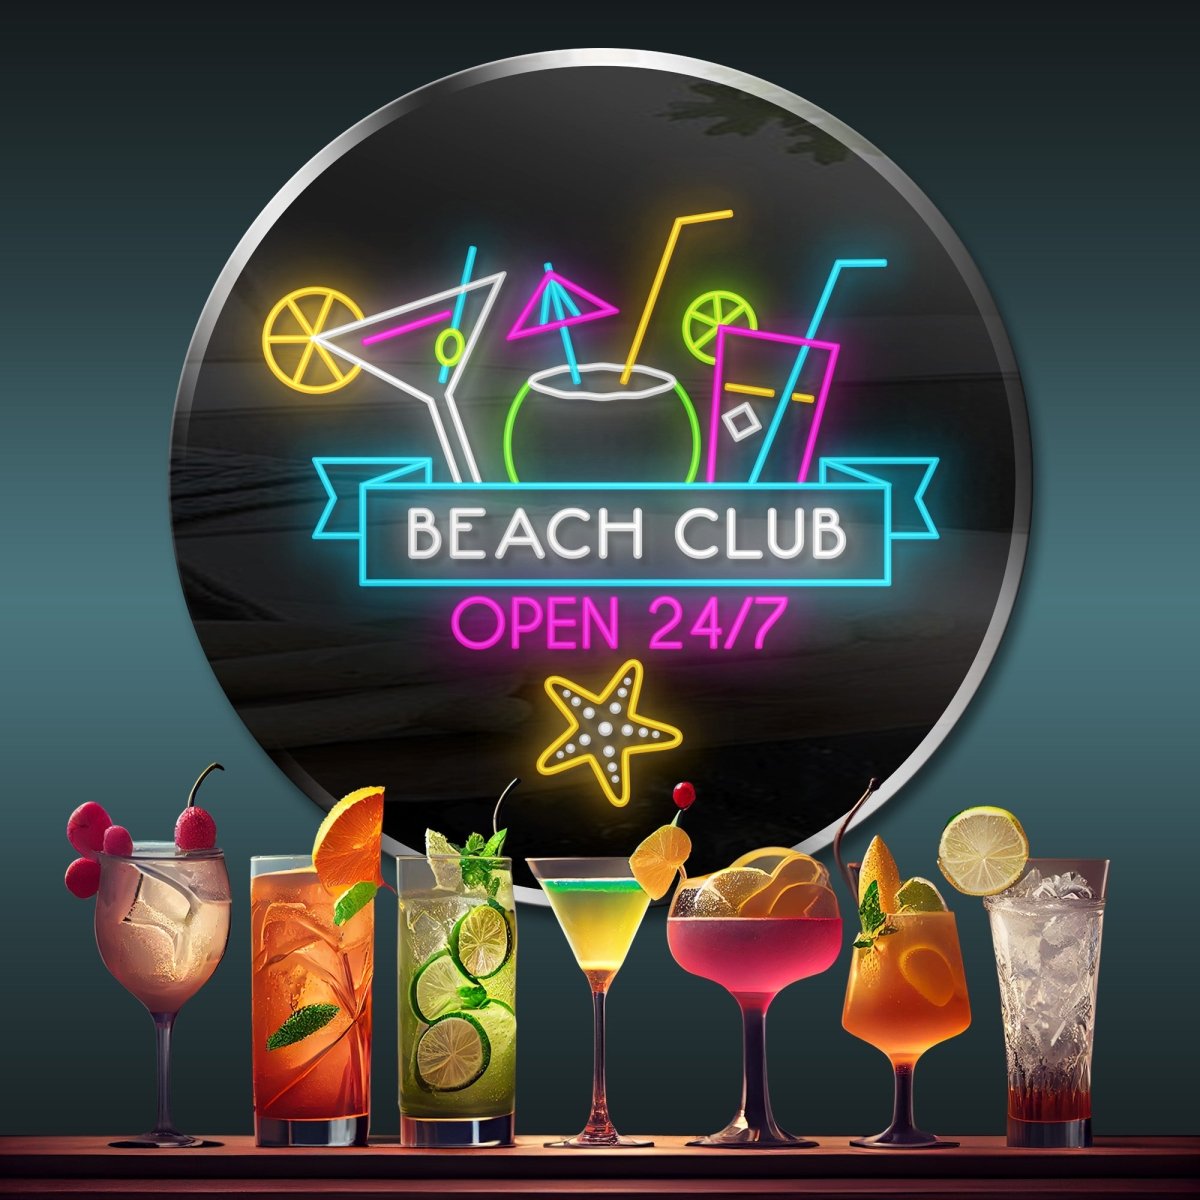 Personalized Neon Sign Beach Club Open 24/7 - madaboutneon